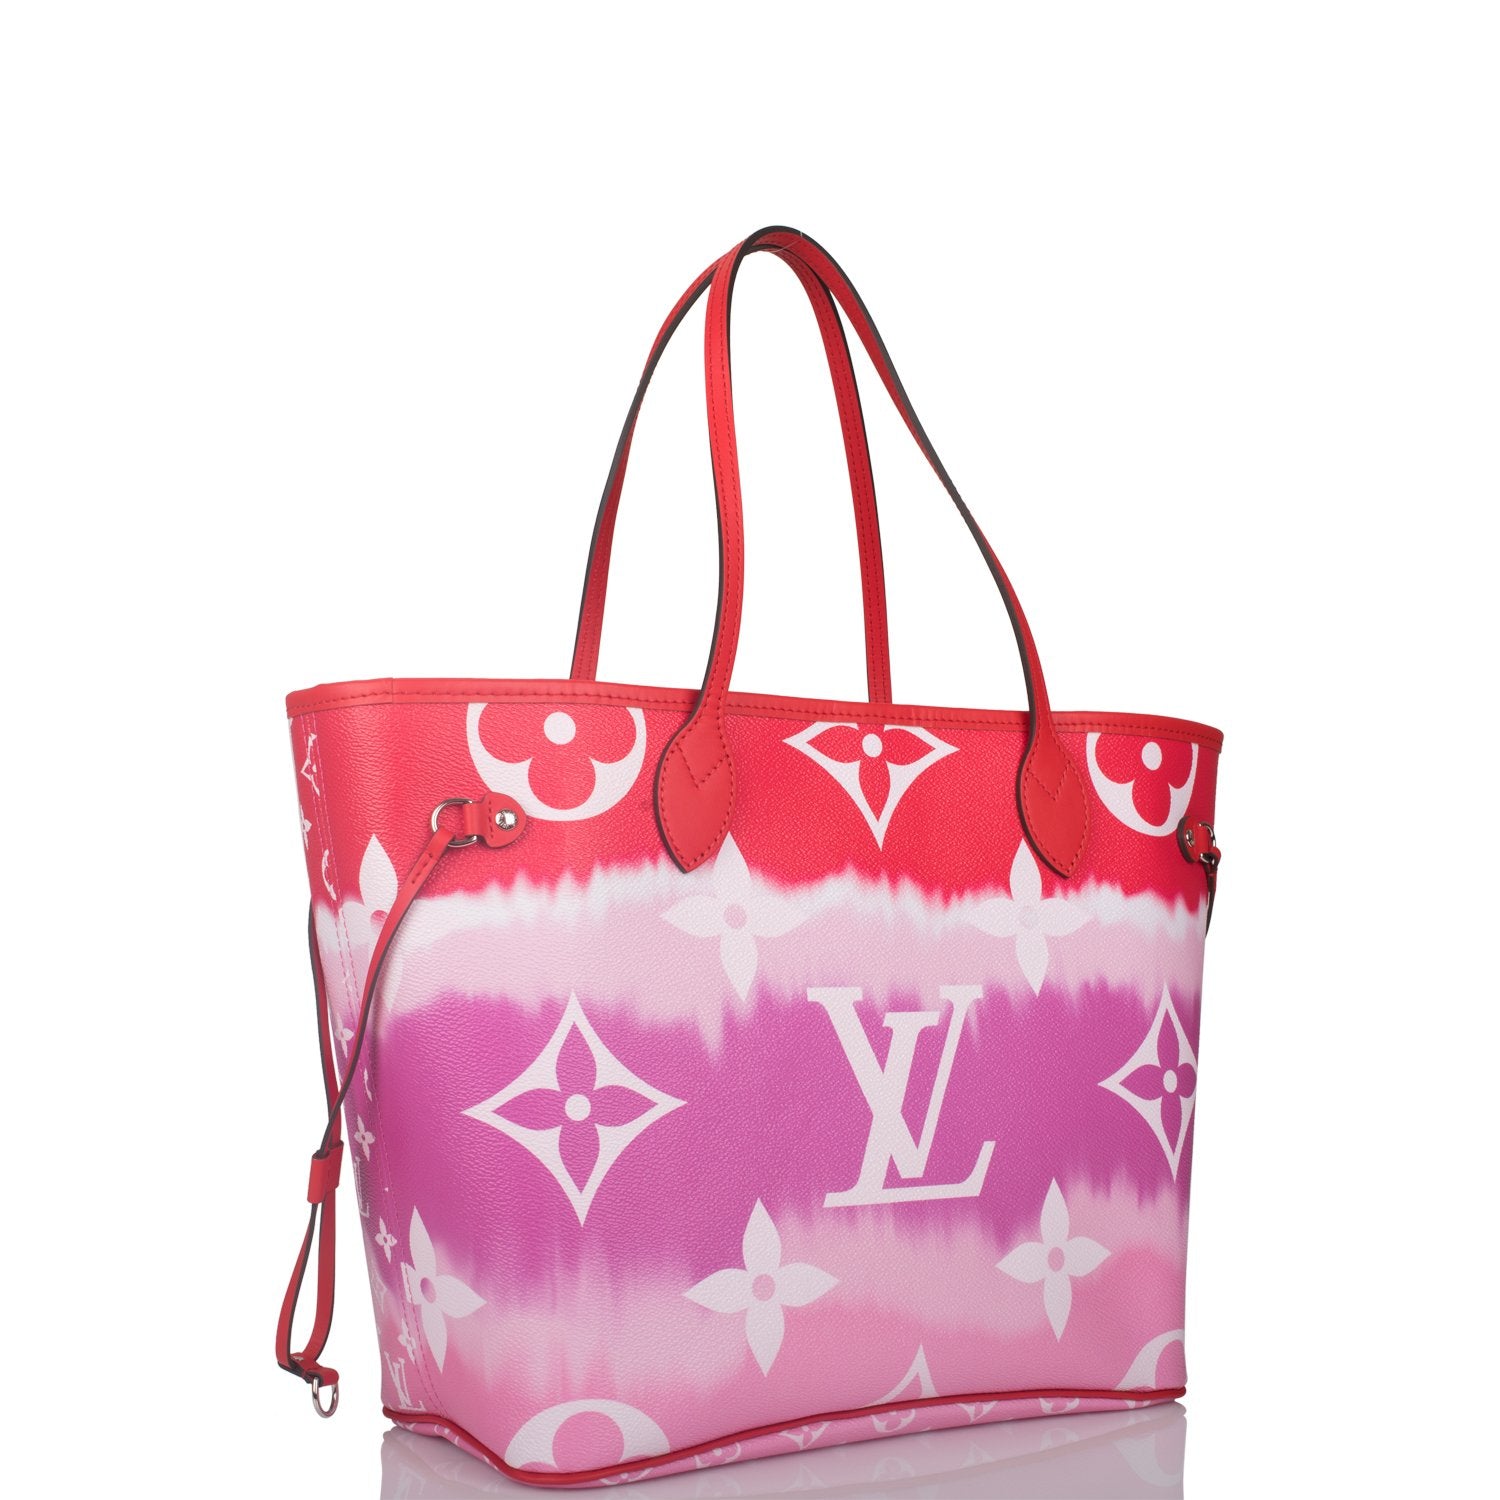 Louis Vuitton Handbags And Accessories - New Arrivals – Madison Avenue Couture